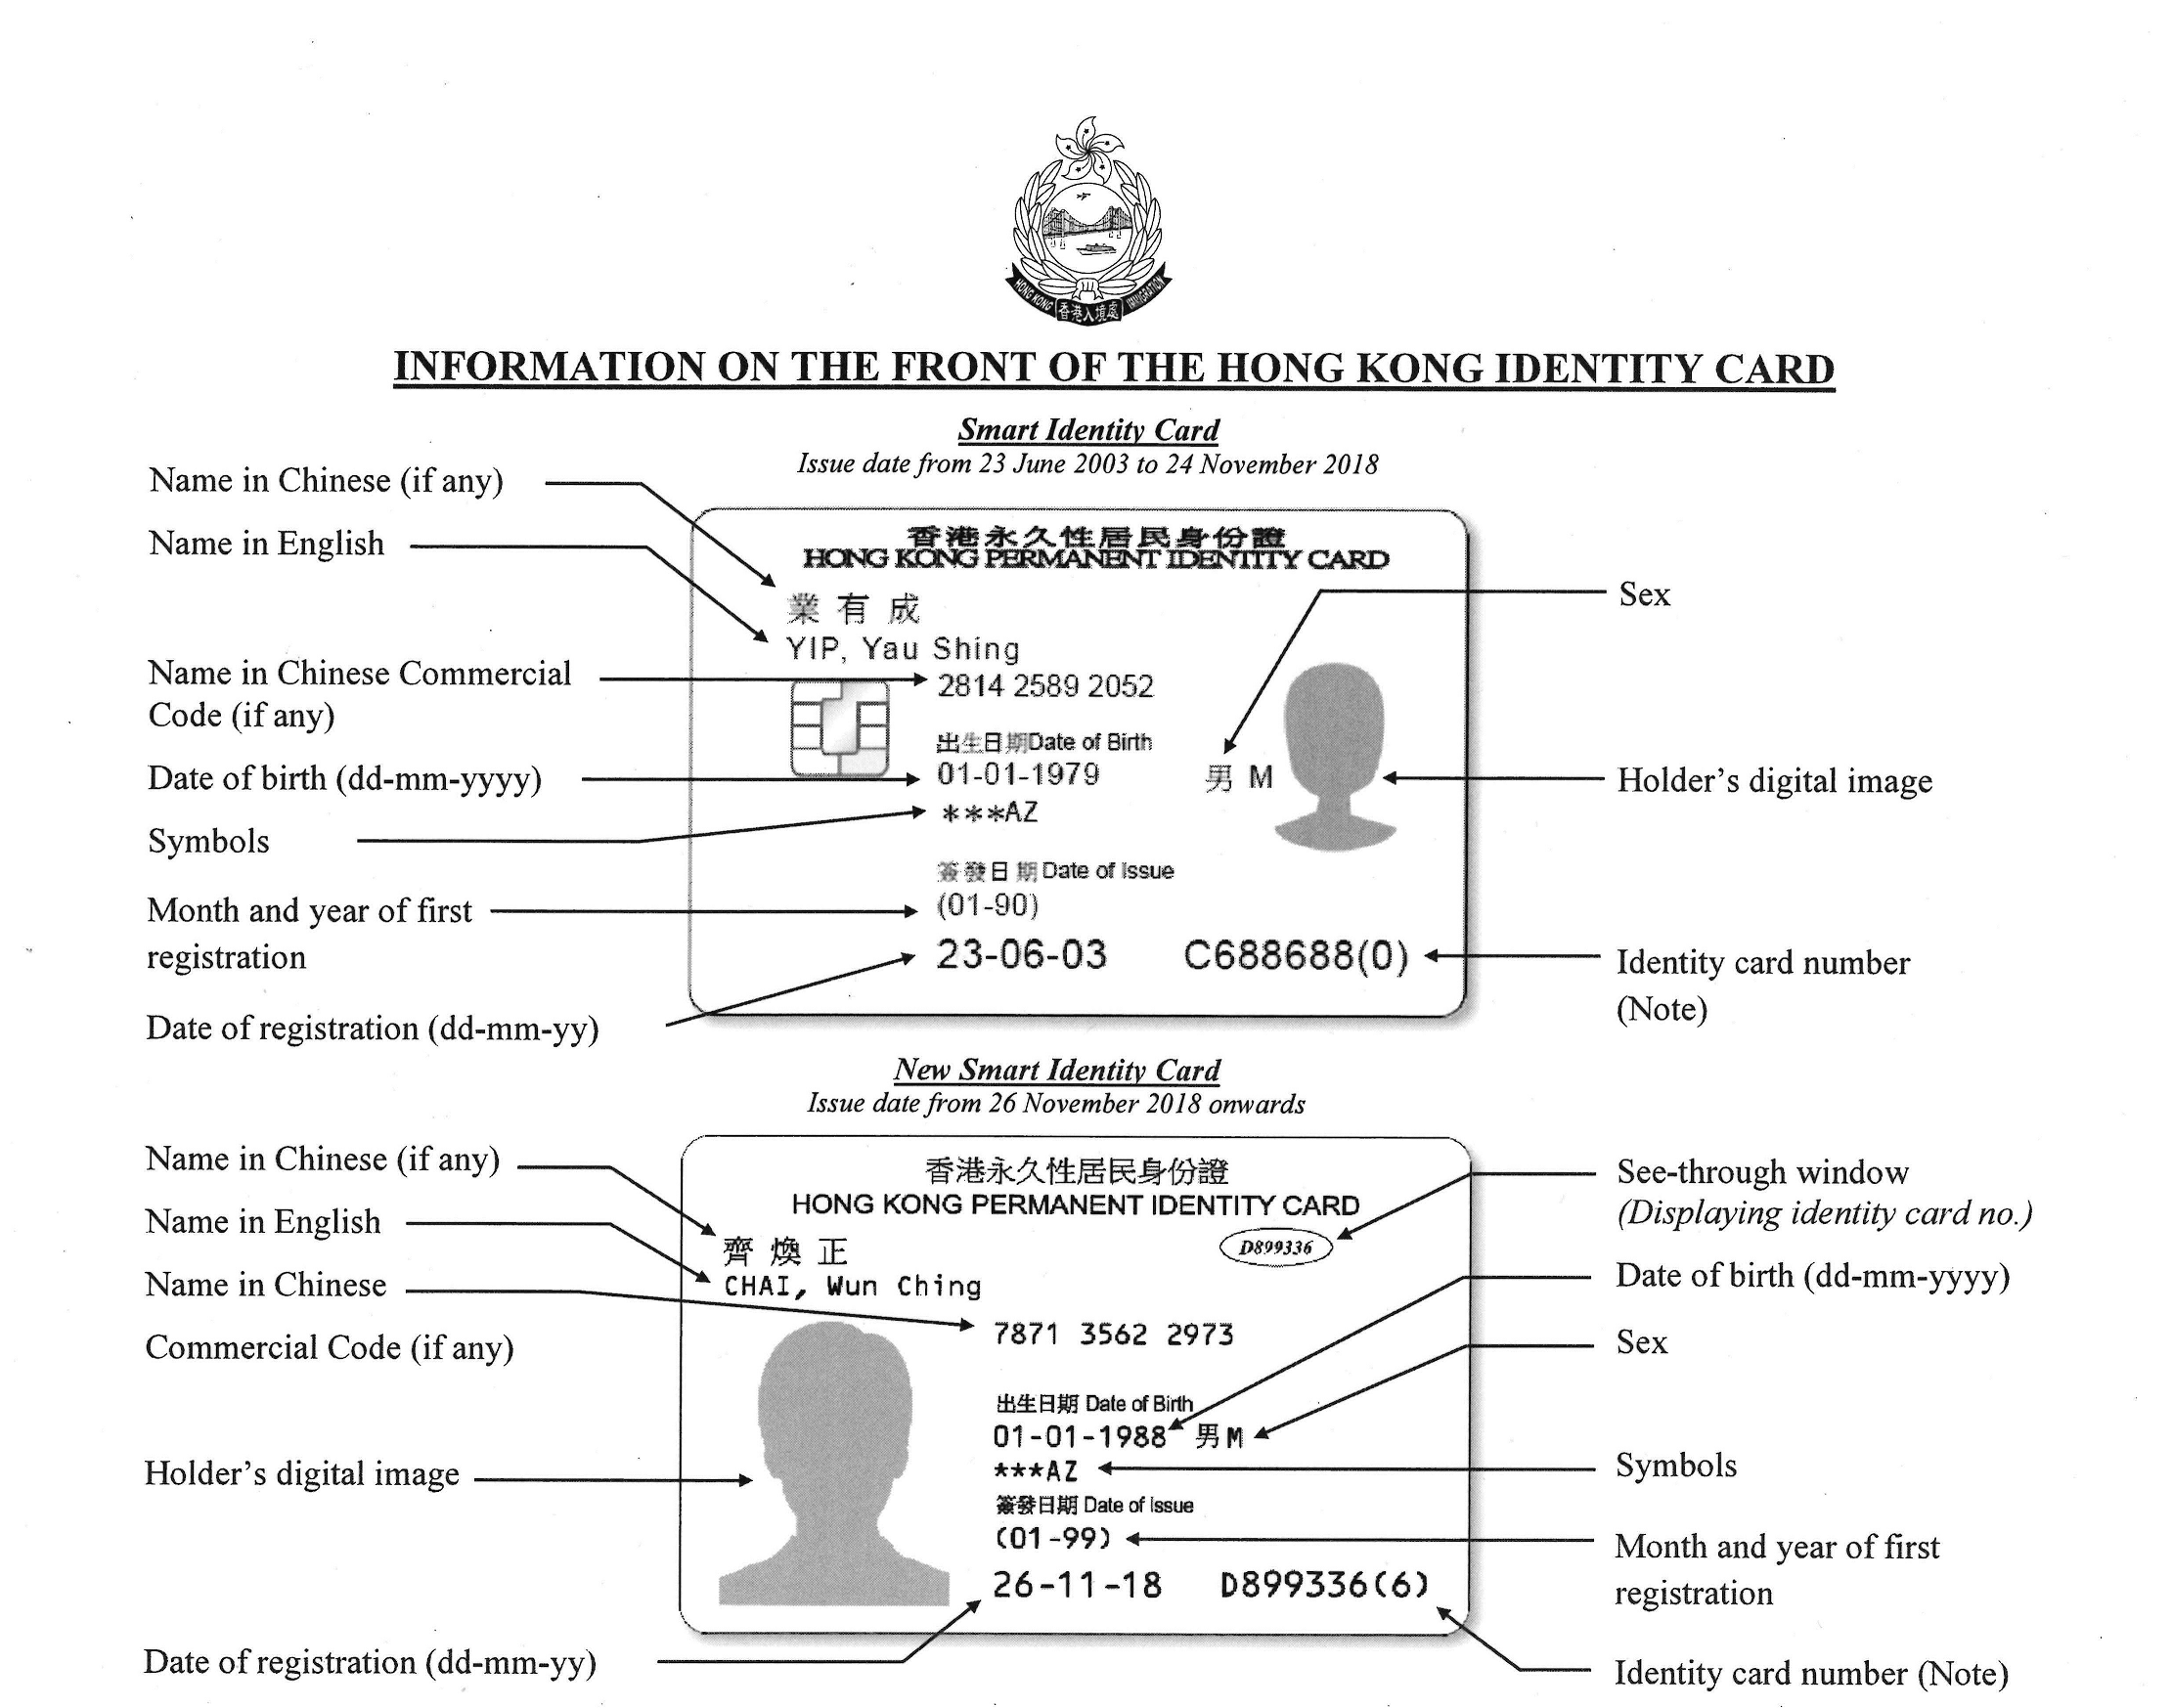 Information on the front of the smart ID card and new smart ID card. (2018) Courtesy of the Immigration Department